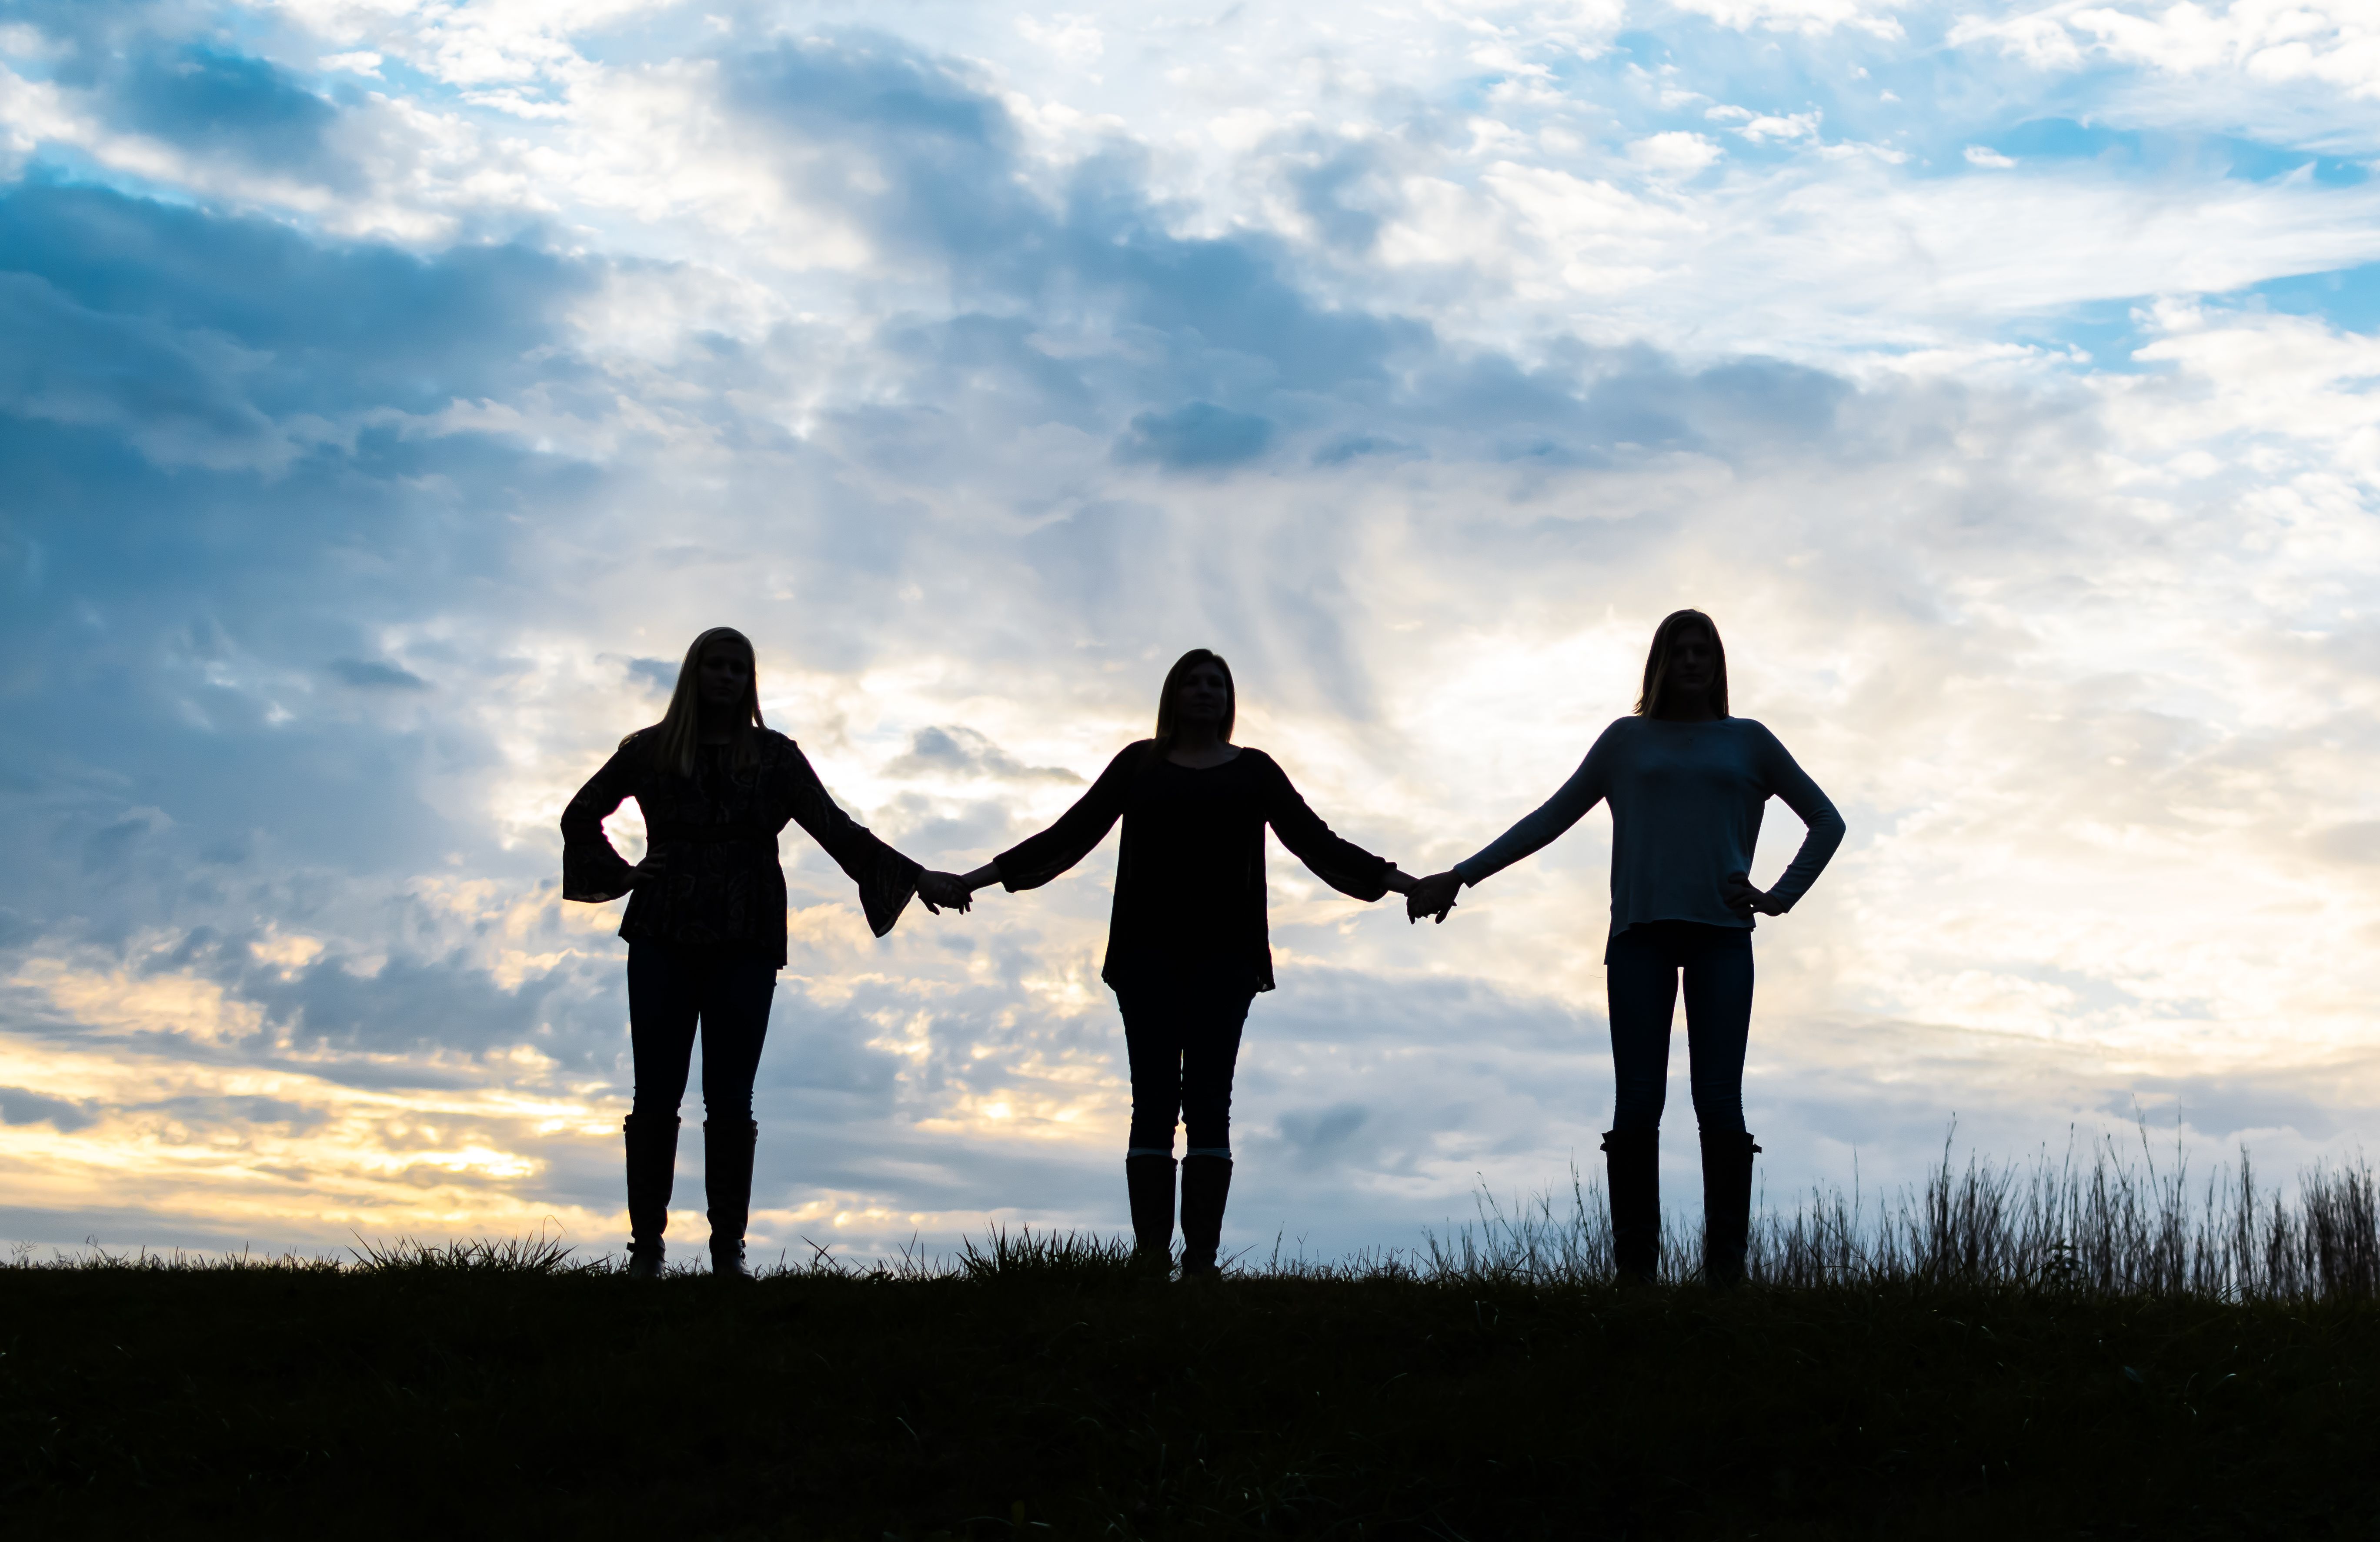 Silhouettes of three best Friends holding hands- tag your besties! Photo by Leeann Rae Pulchny P. Friends holding hands, Three best friends, Friend picture poses